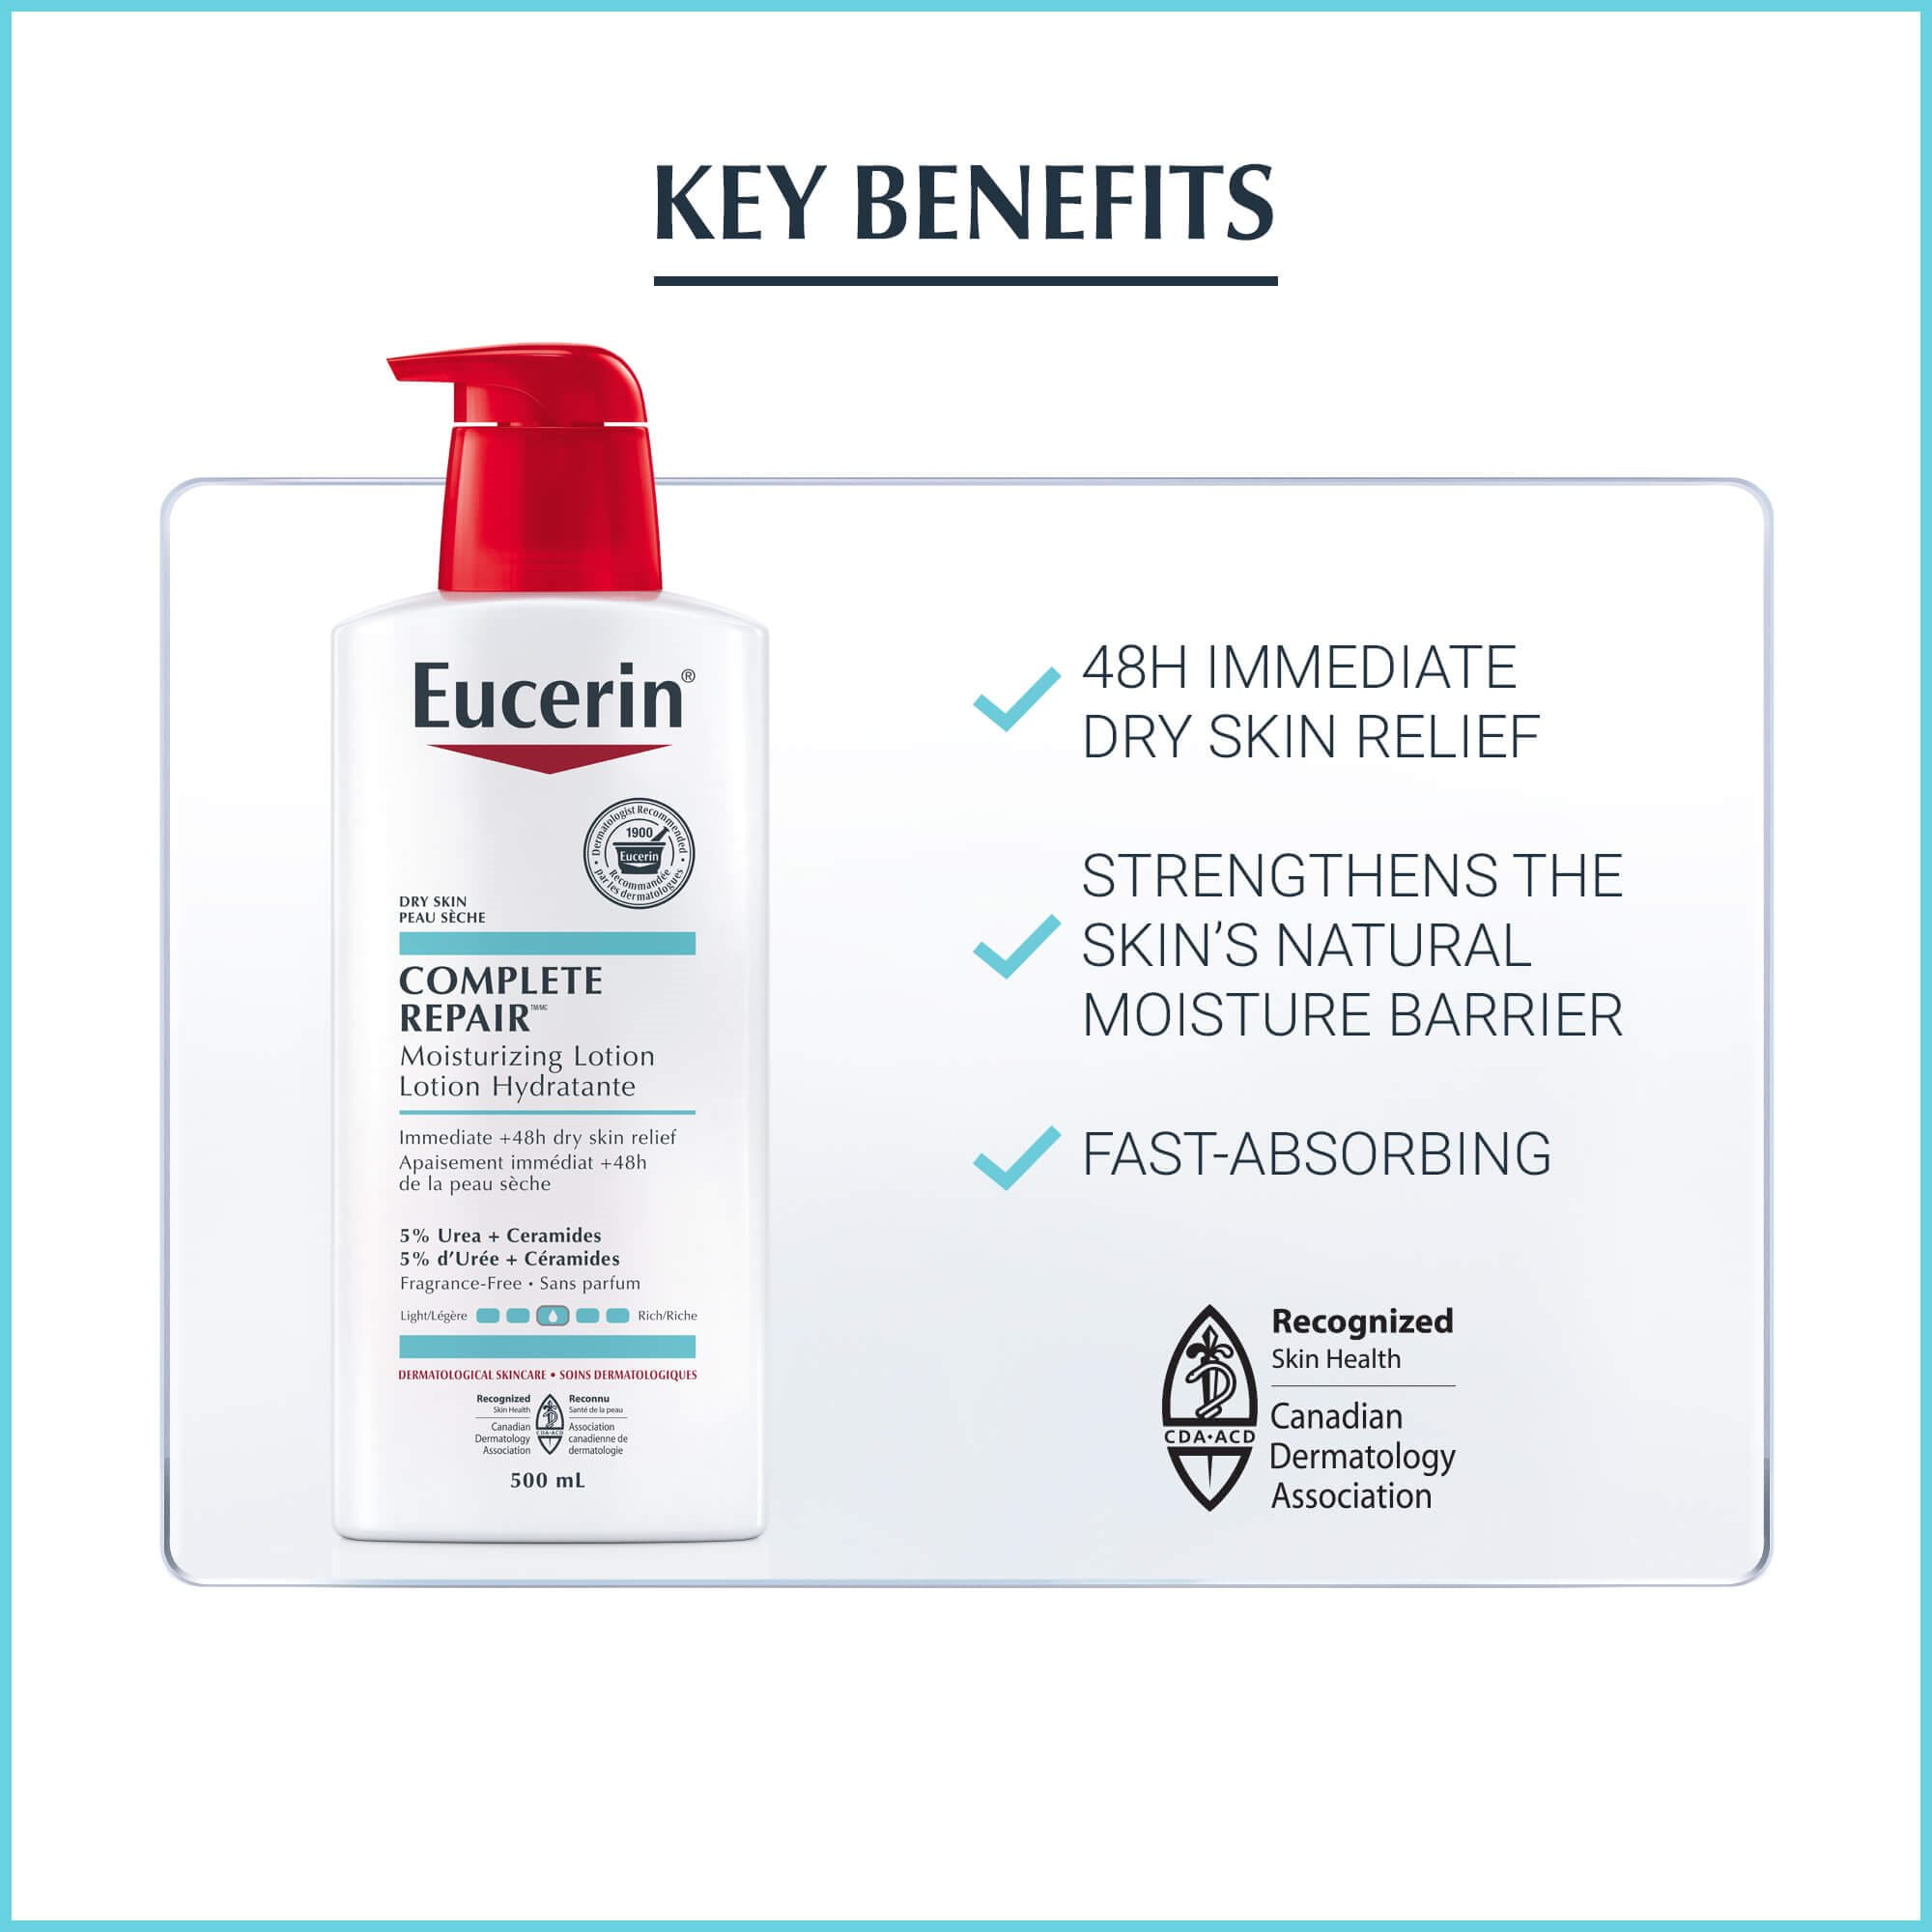 Image listing the key benefits of using Eucerin Complete Repair Lotion.